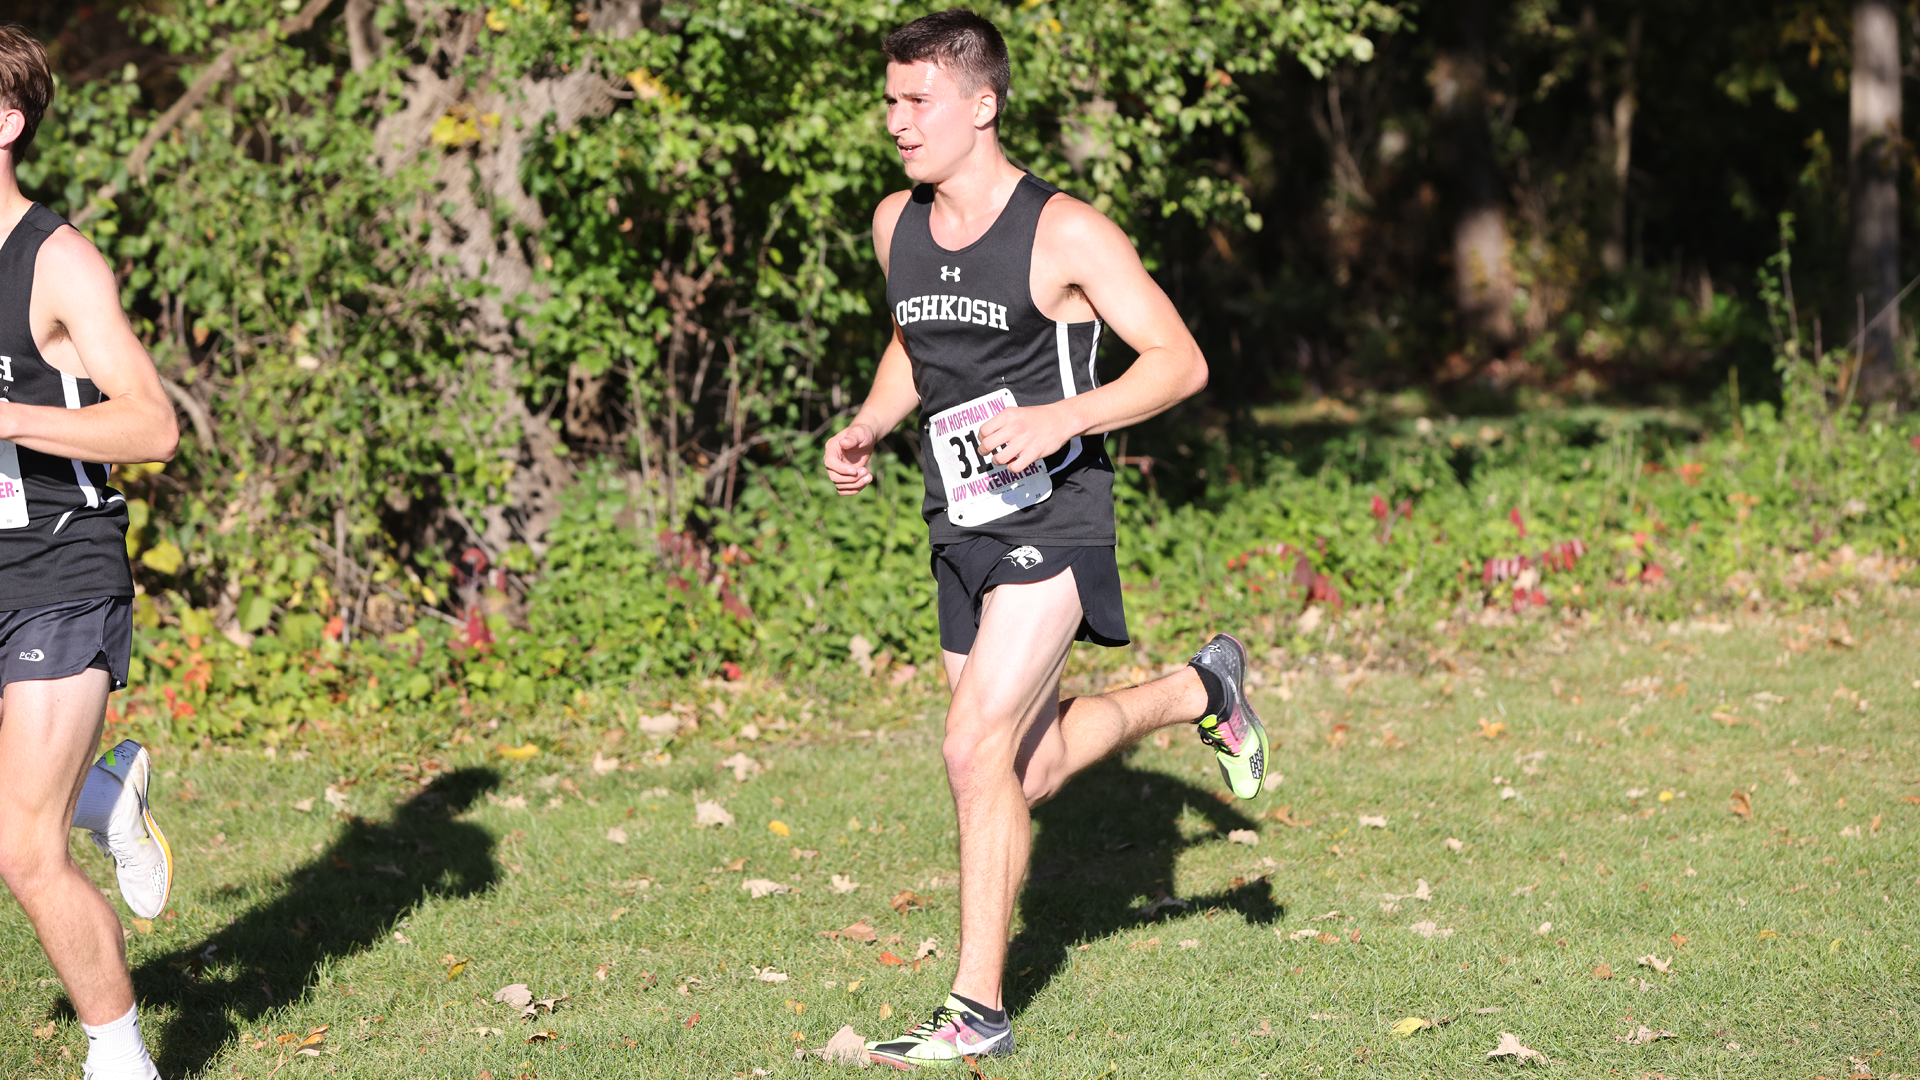 Brady Lewis ran a sixth-place, 27:35.95 performance at the Ripon College Red Hawk Invite